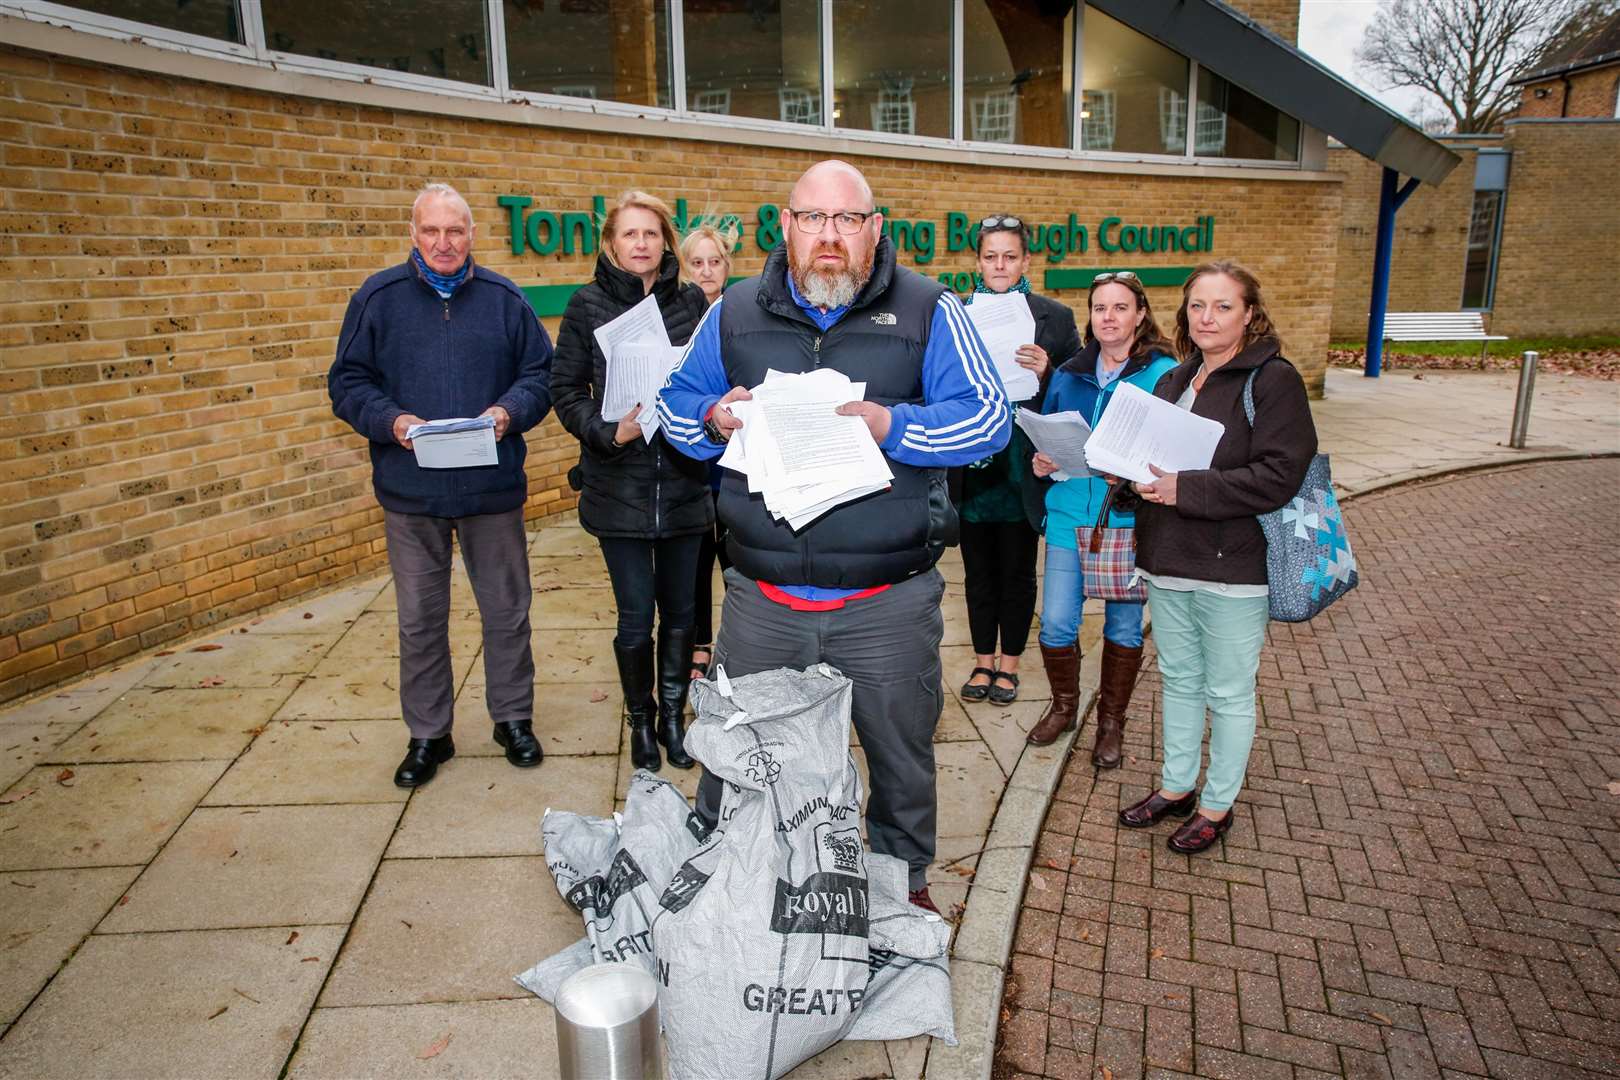 Eccles residents hand in hundreds of letters against the Bushy Wood Development. Eccles residents Sue McKinlay, Ray Sturgeon, Steven Beadle (in front), Emily Catt, Sandra Stokes, Jackie Sturgeon, Helen Spain and Tanja Levesley. Picture: Matthew Walker. (5502447)